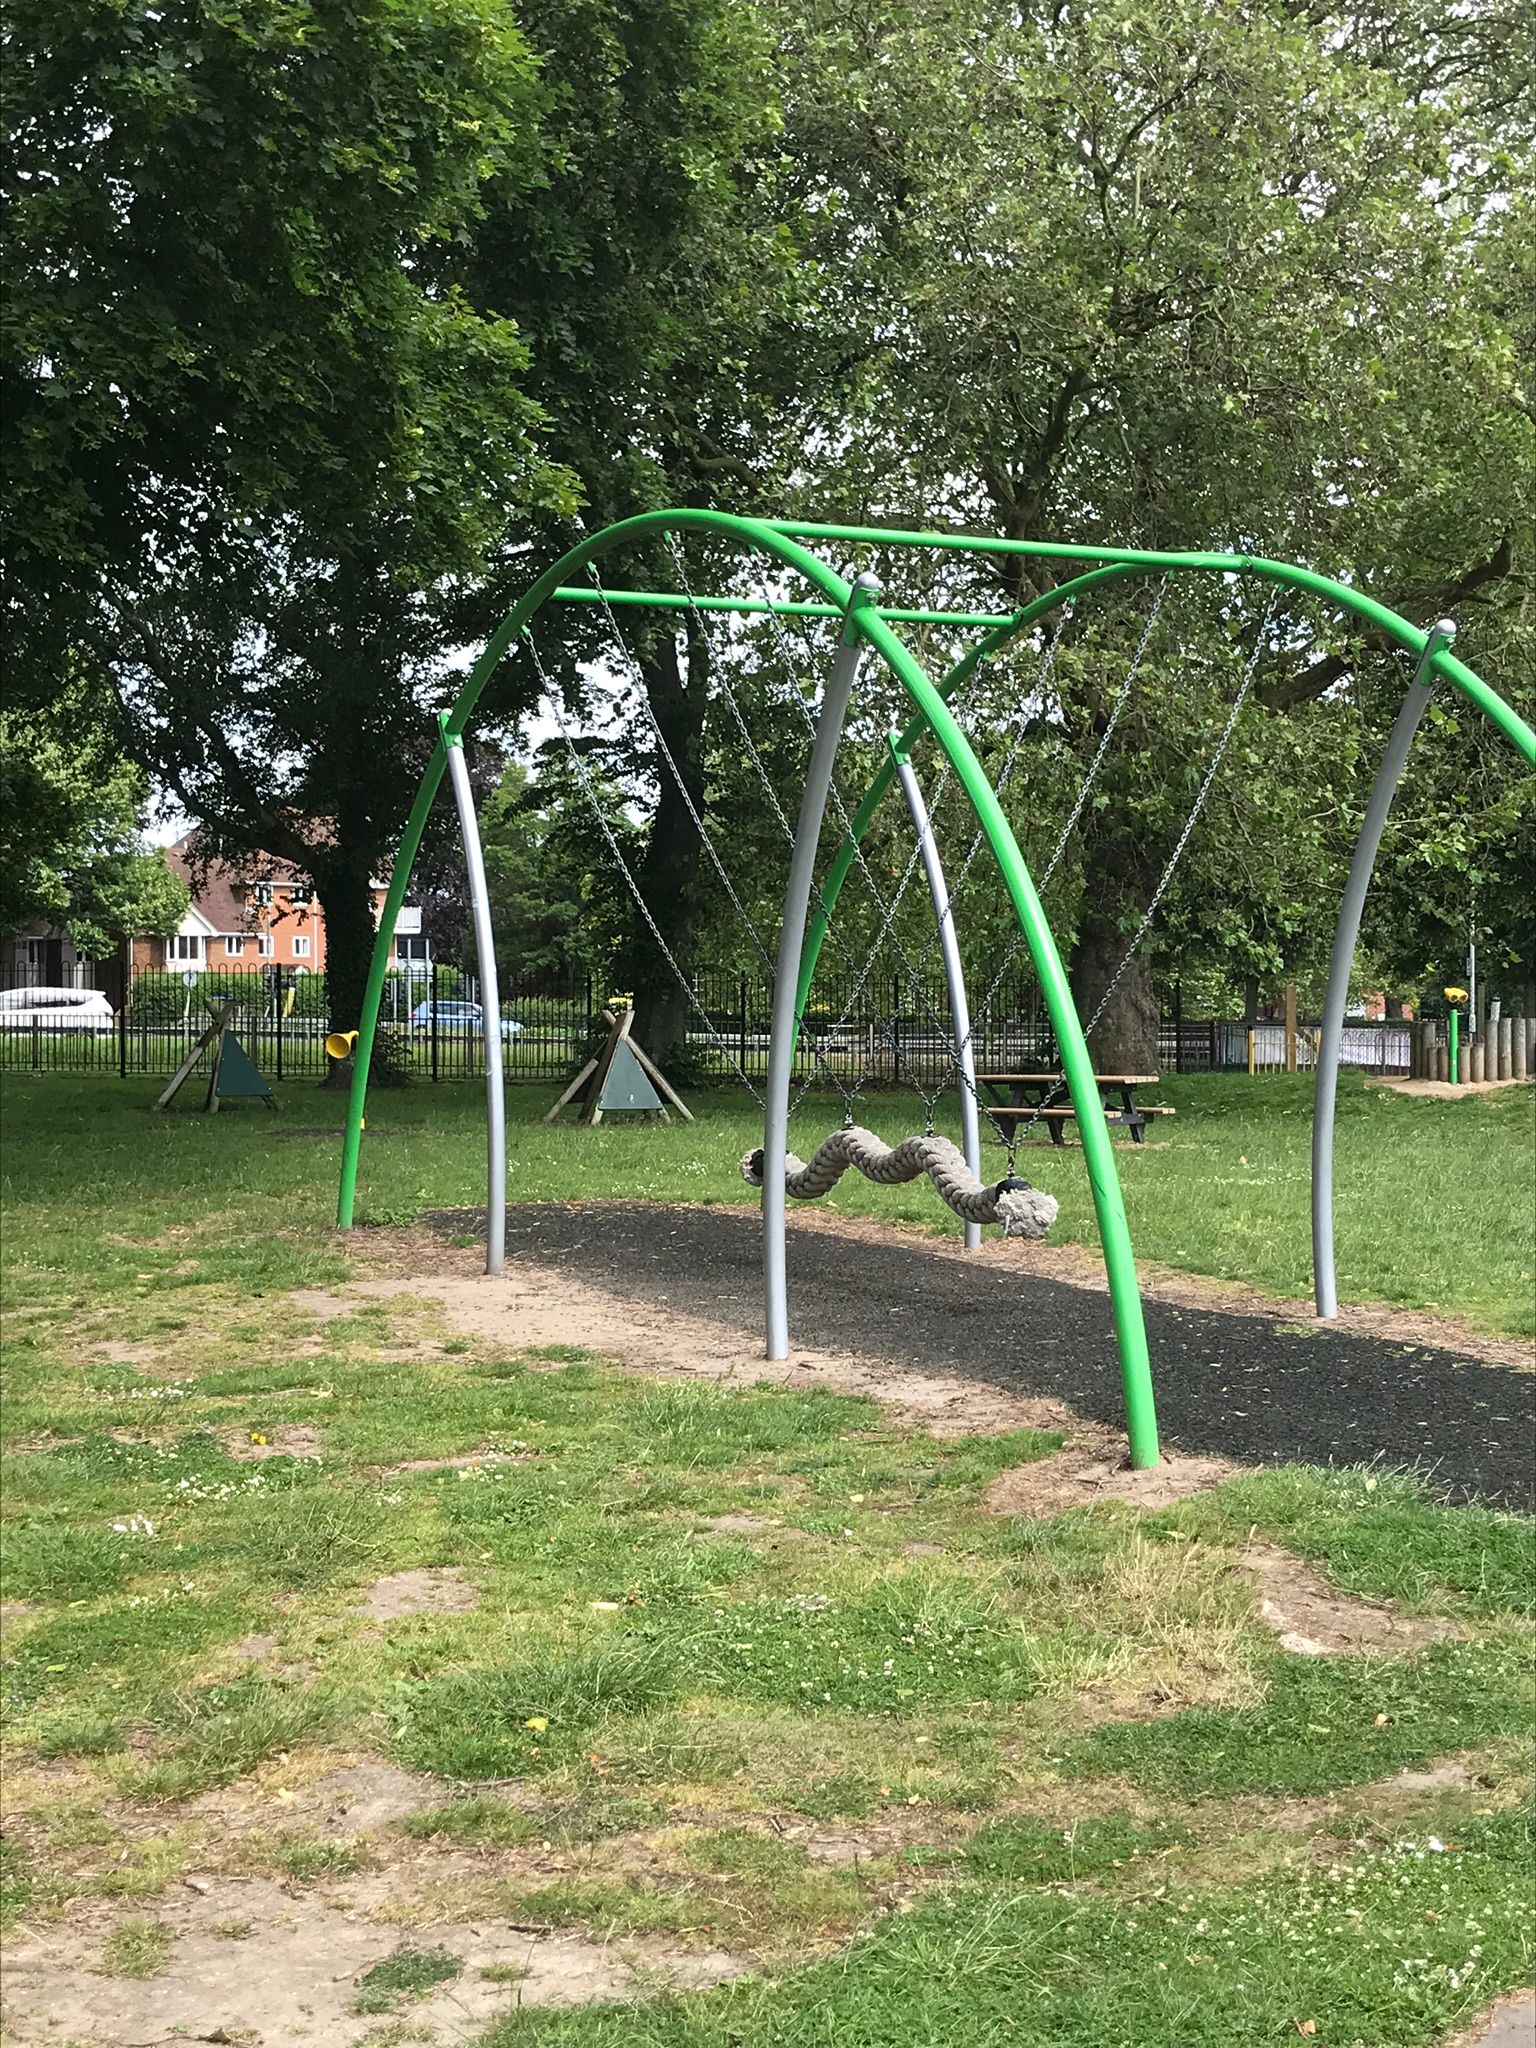 long rope swing in the fore-ground and climbing frames can be seen in the shade of the trees